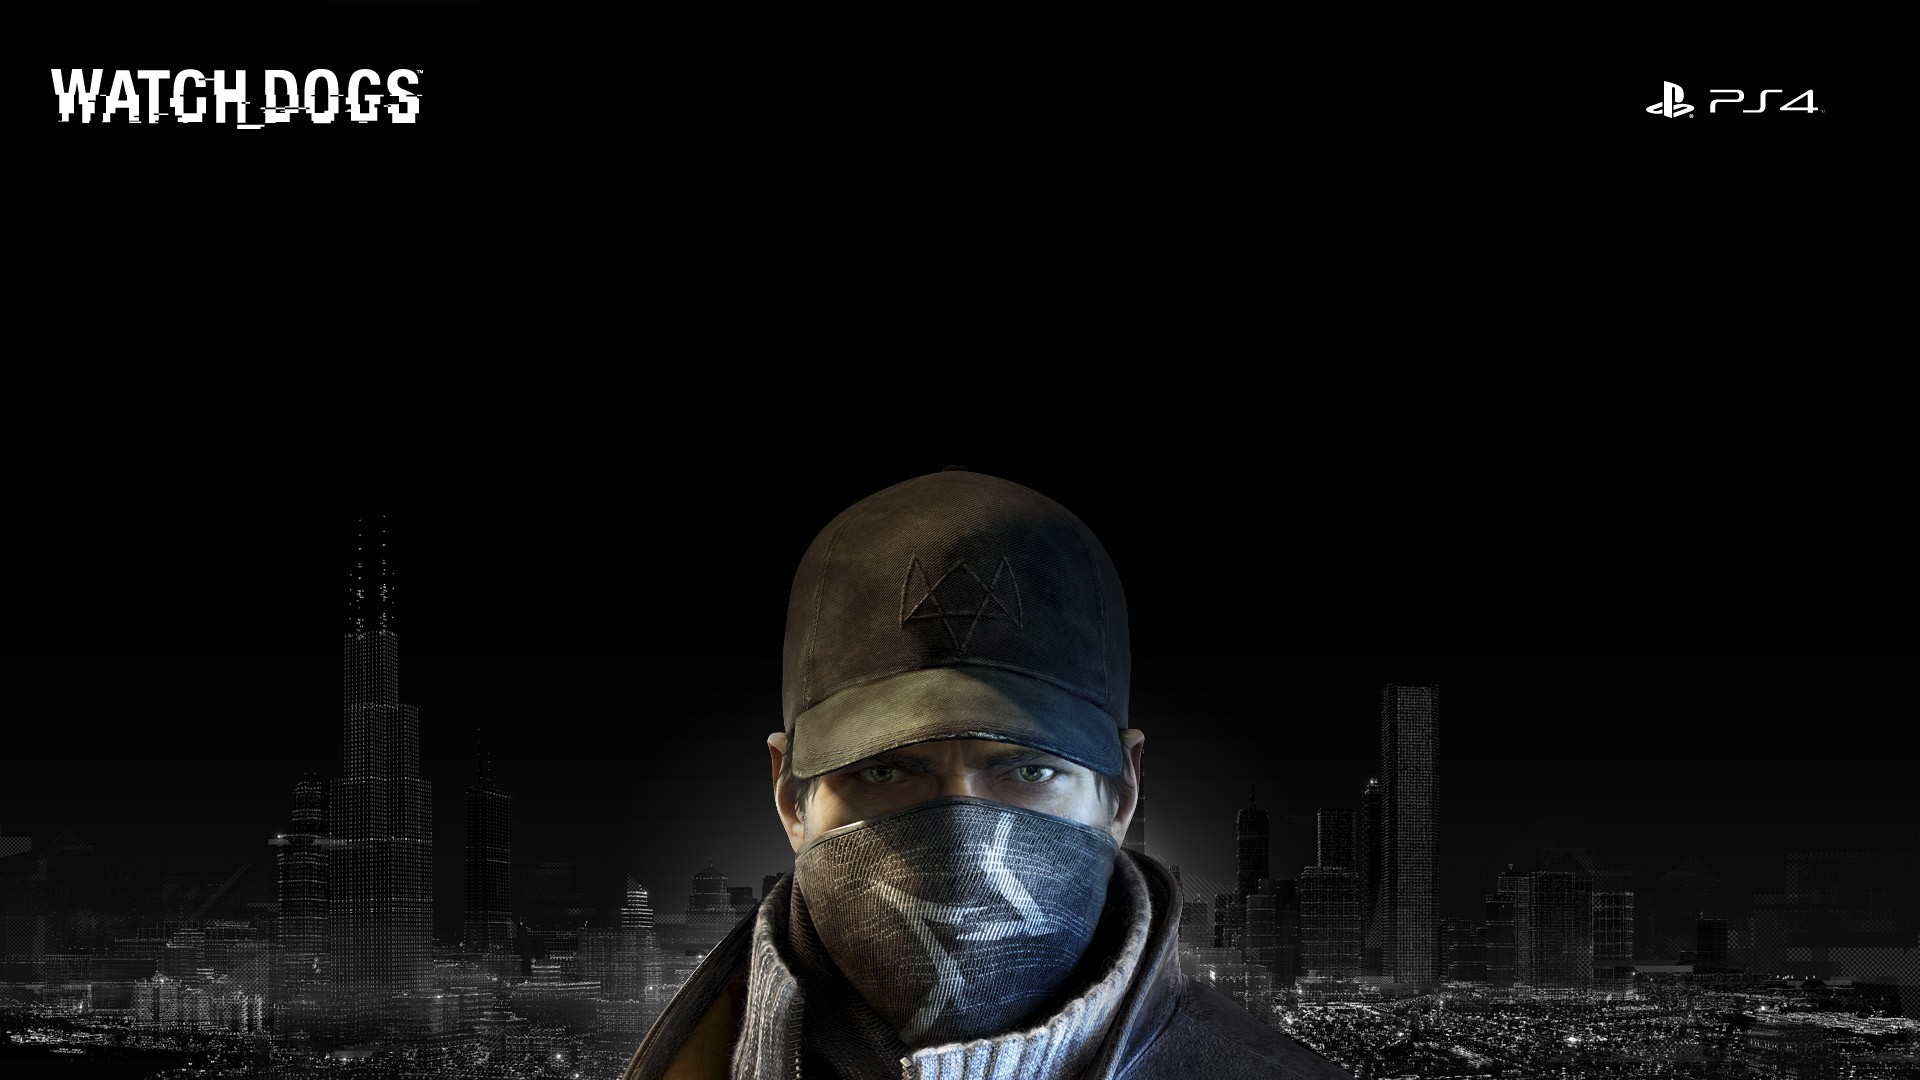 Free Images  Watch Dogs